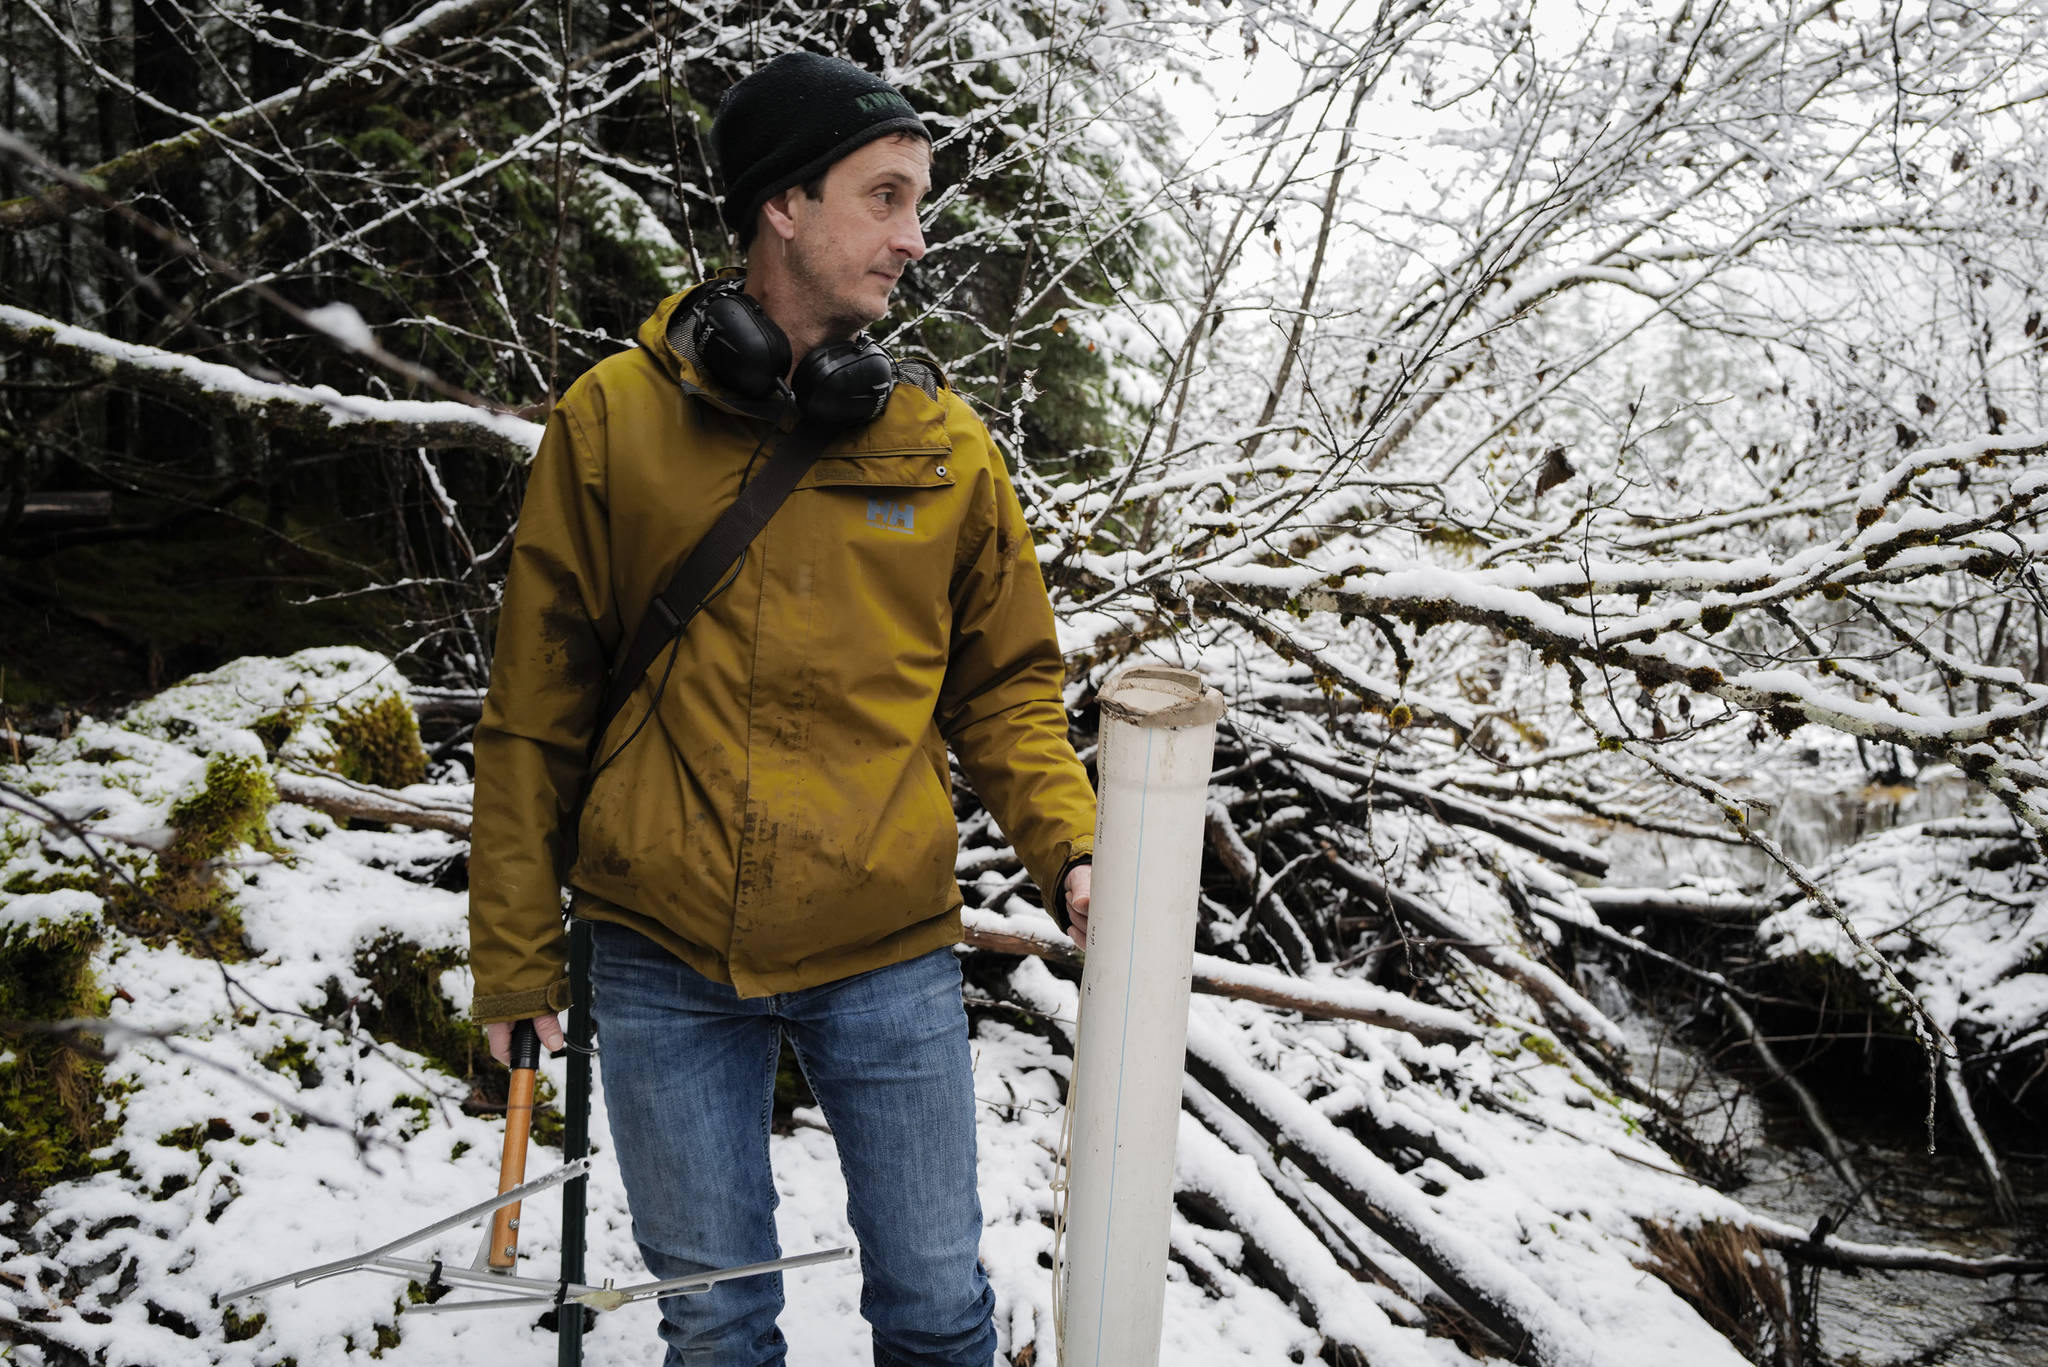 Jake Musslewhite, a fisheries biologist with the U.S. Forest Service, pauses while searching for a radio fish tag in Dredge Lake on Wednesday, Dec. 4, 2019. Musslewhite has been conducting a study tracking adult coho salmon in the Dredge Lakes drainage system. (Michael Penn | Juneau Empire)